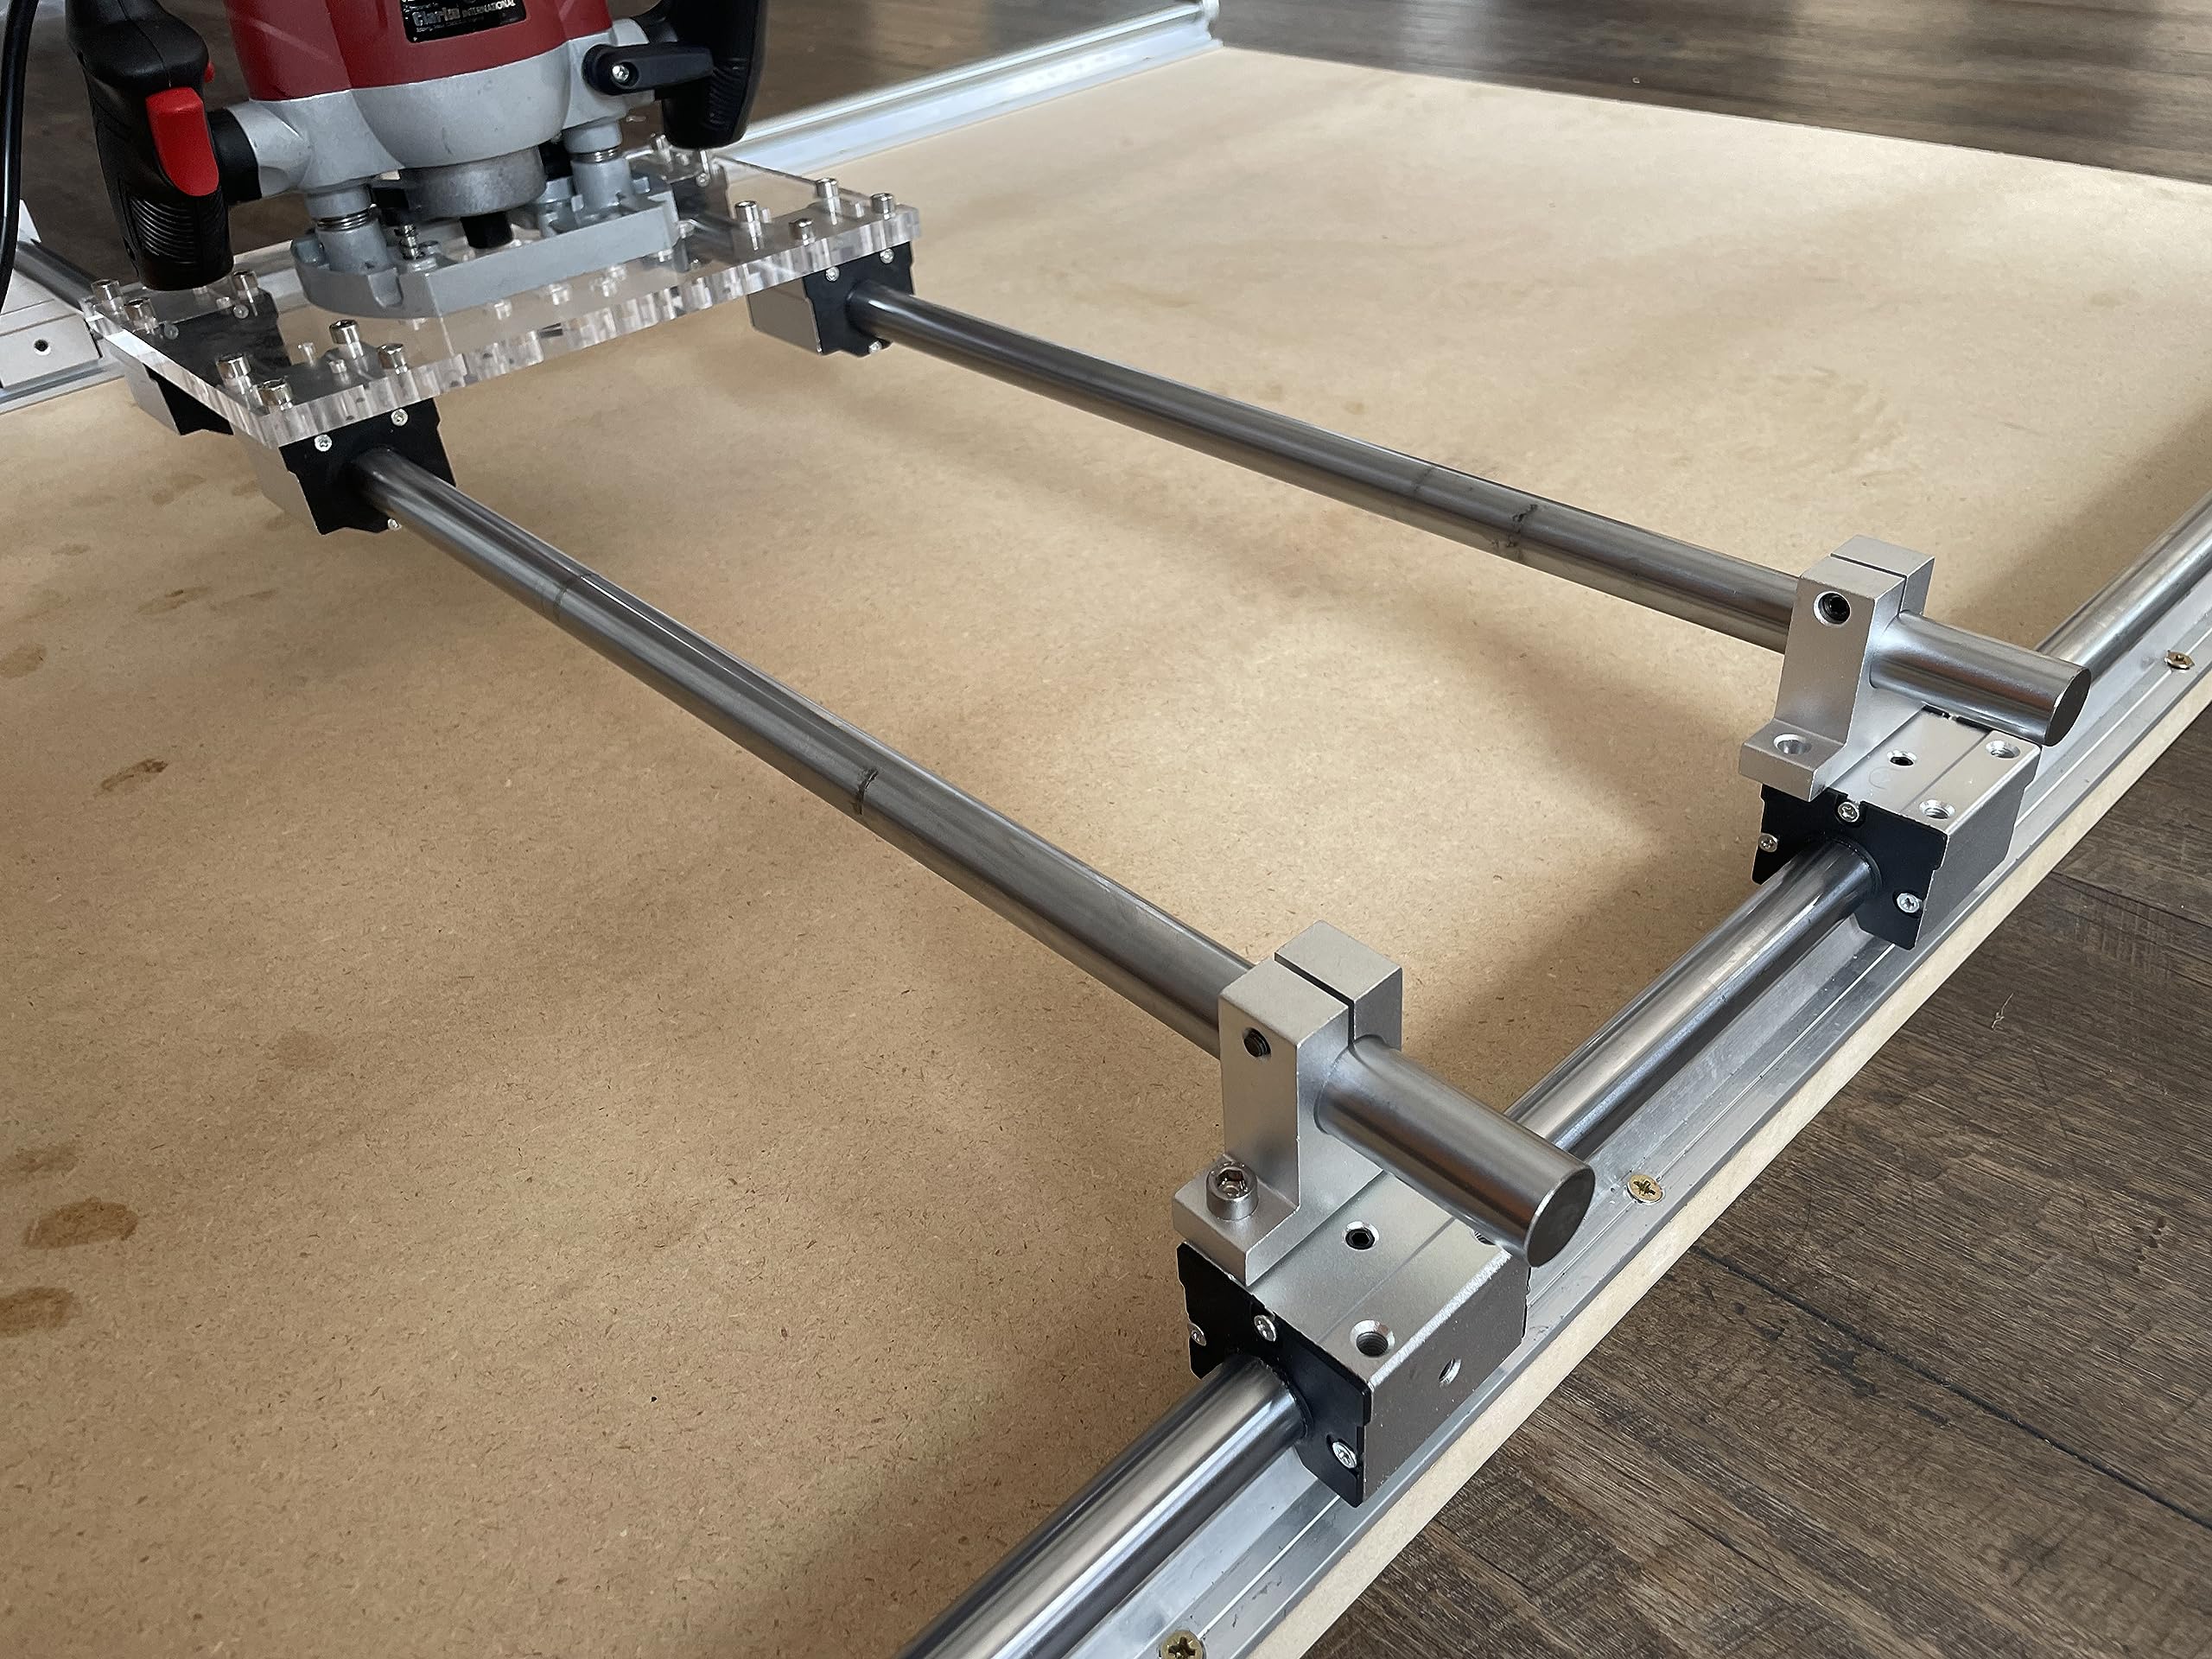 Router Sled - Wood Slab Flattening Mill Router Jig - Up to 1500x1500mm (1500x1500mm)